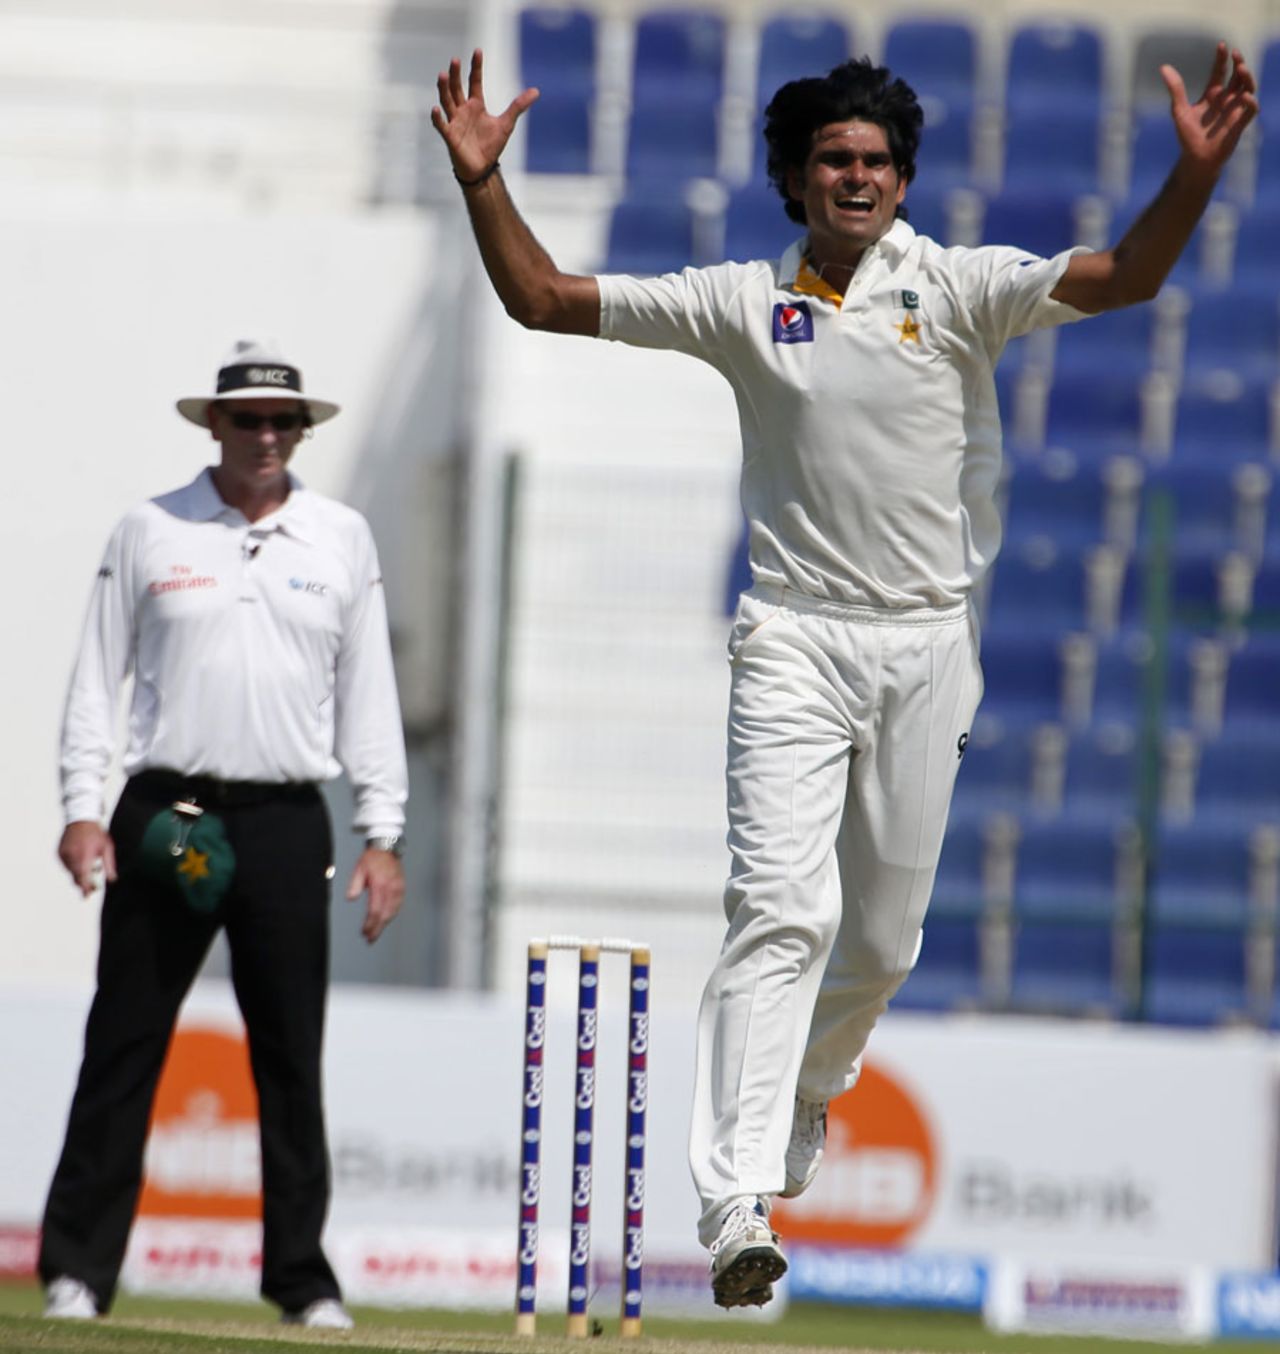 Mohammad Irfan ecstatic after a wicket falls, Pakistan v South Africa, 1st Test, Abu Dhabi, 1st day, October 14, 2013